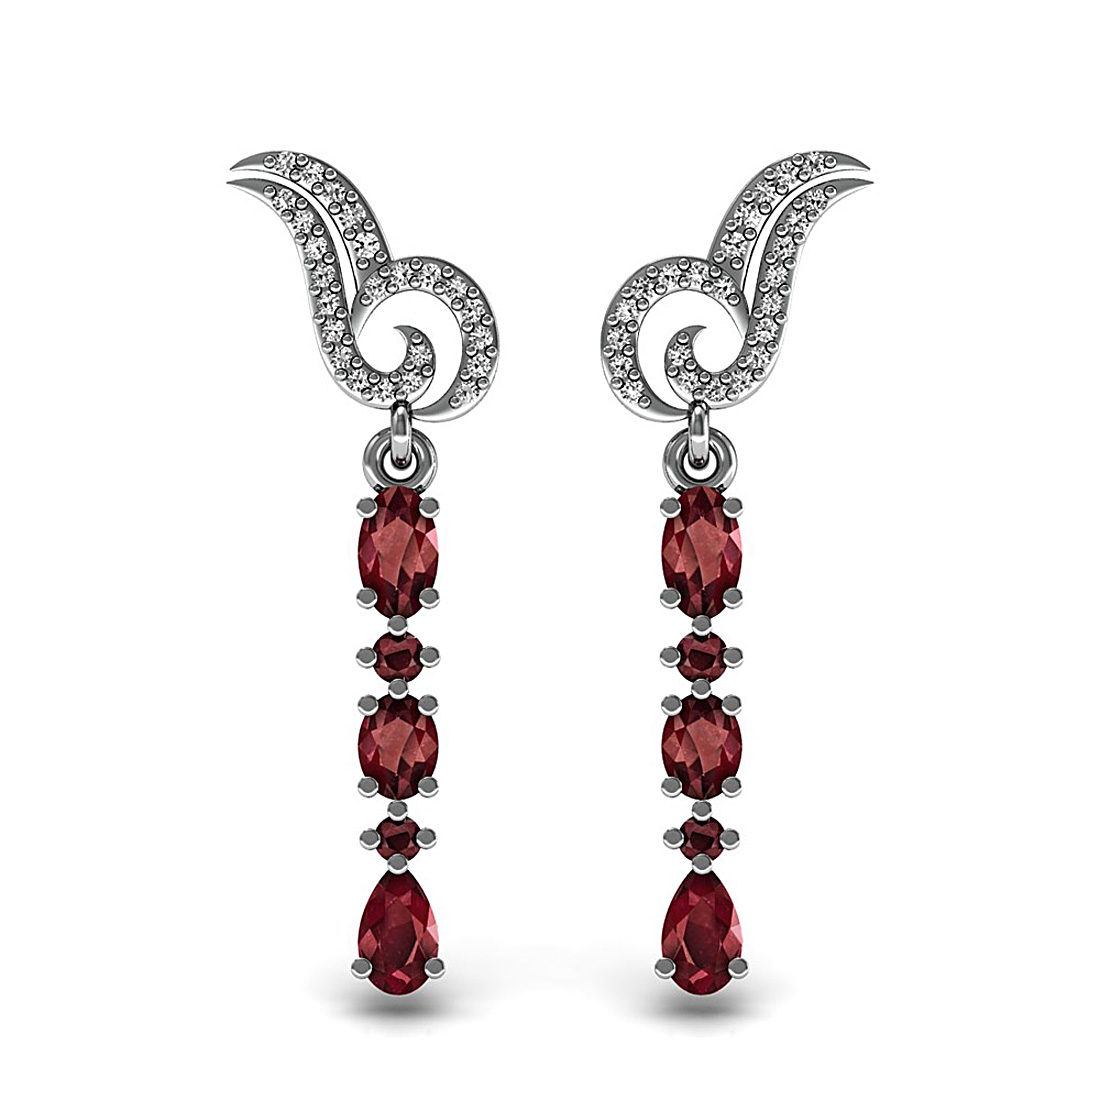 Natural ruby gemstone fine dangle earrings made in 18k solid white gold adorned with real diamond.